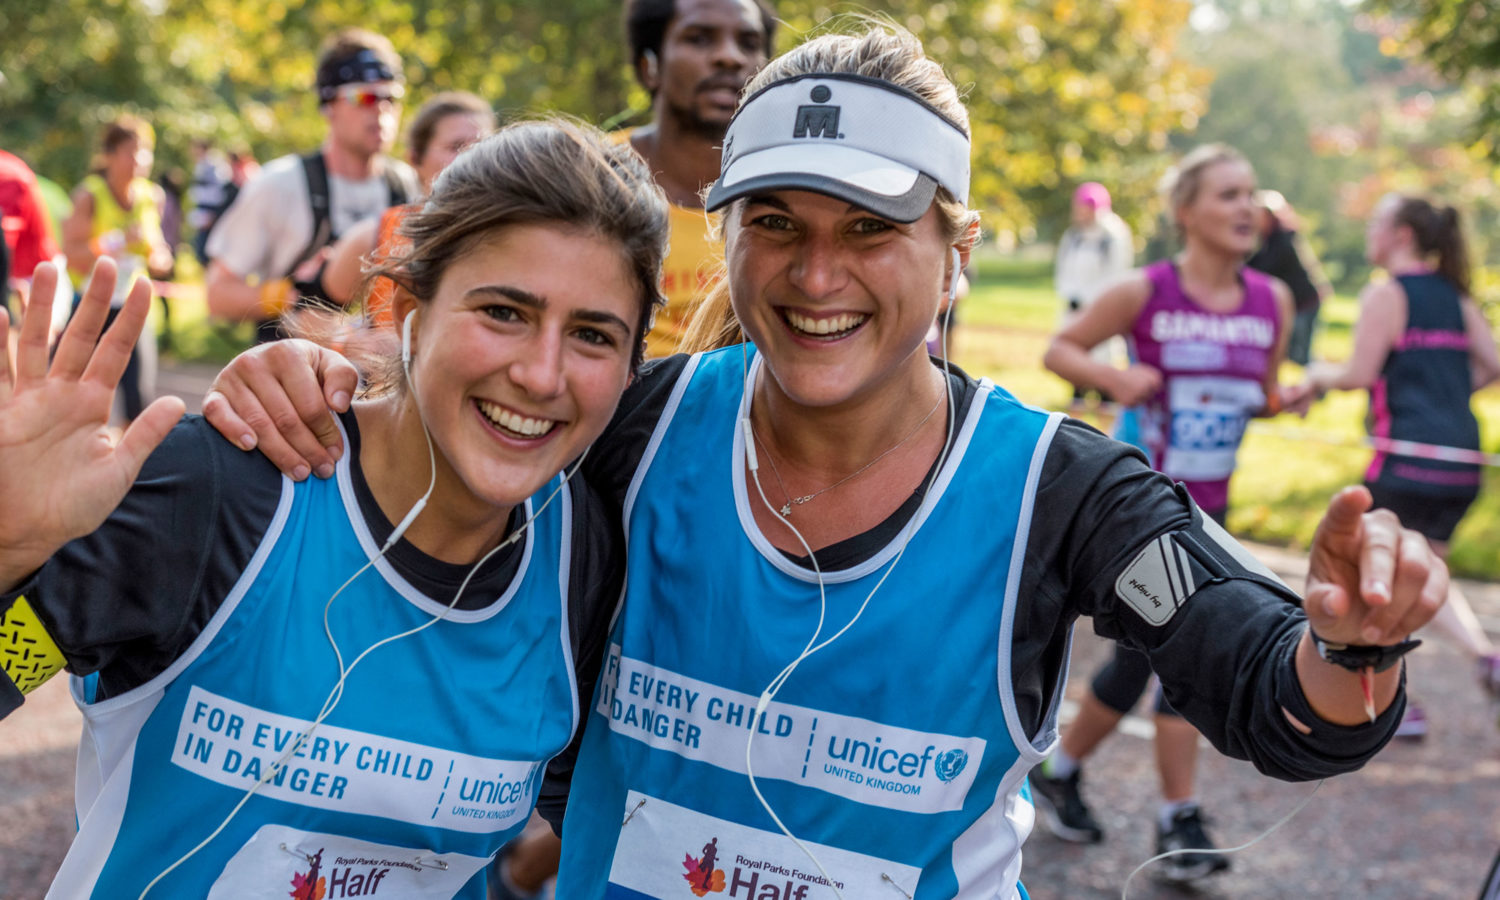 Sign up for a charity run with Team Unicef